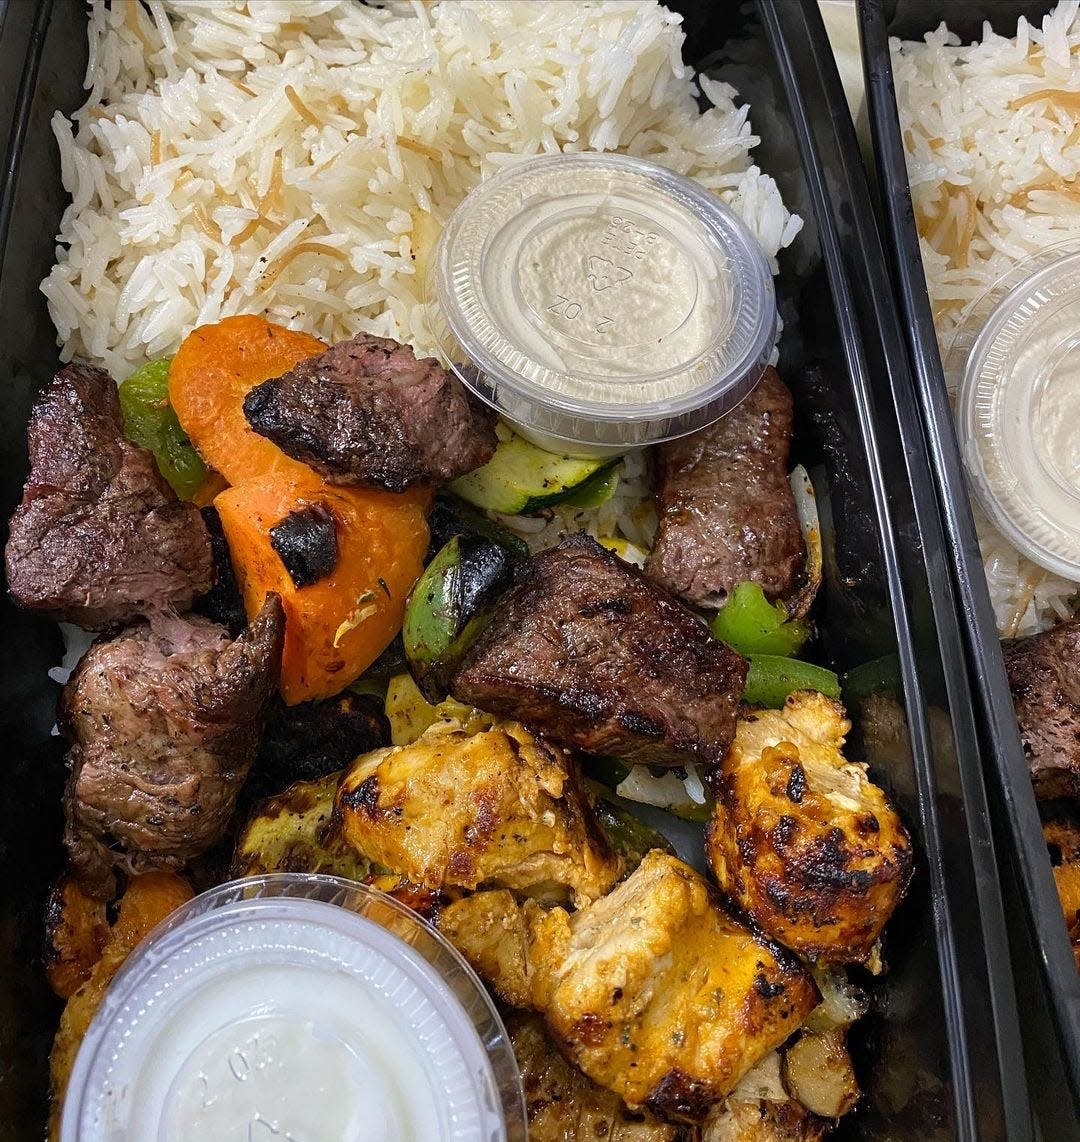 A sample from Baba's Grill for Dearborn Restaurant Week.